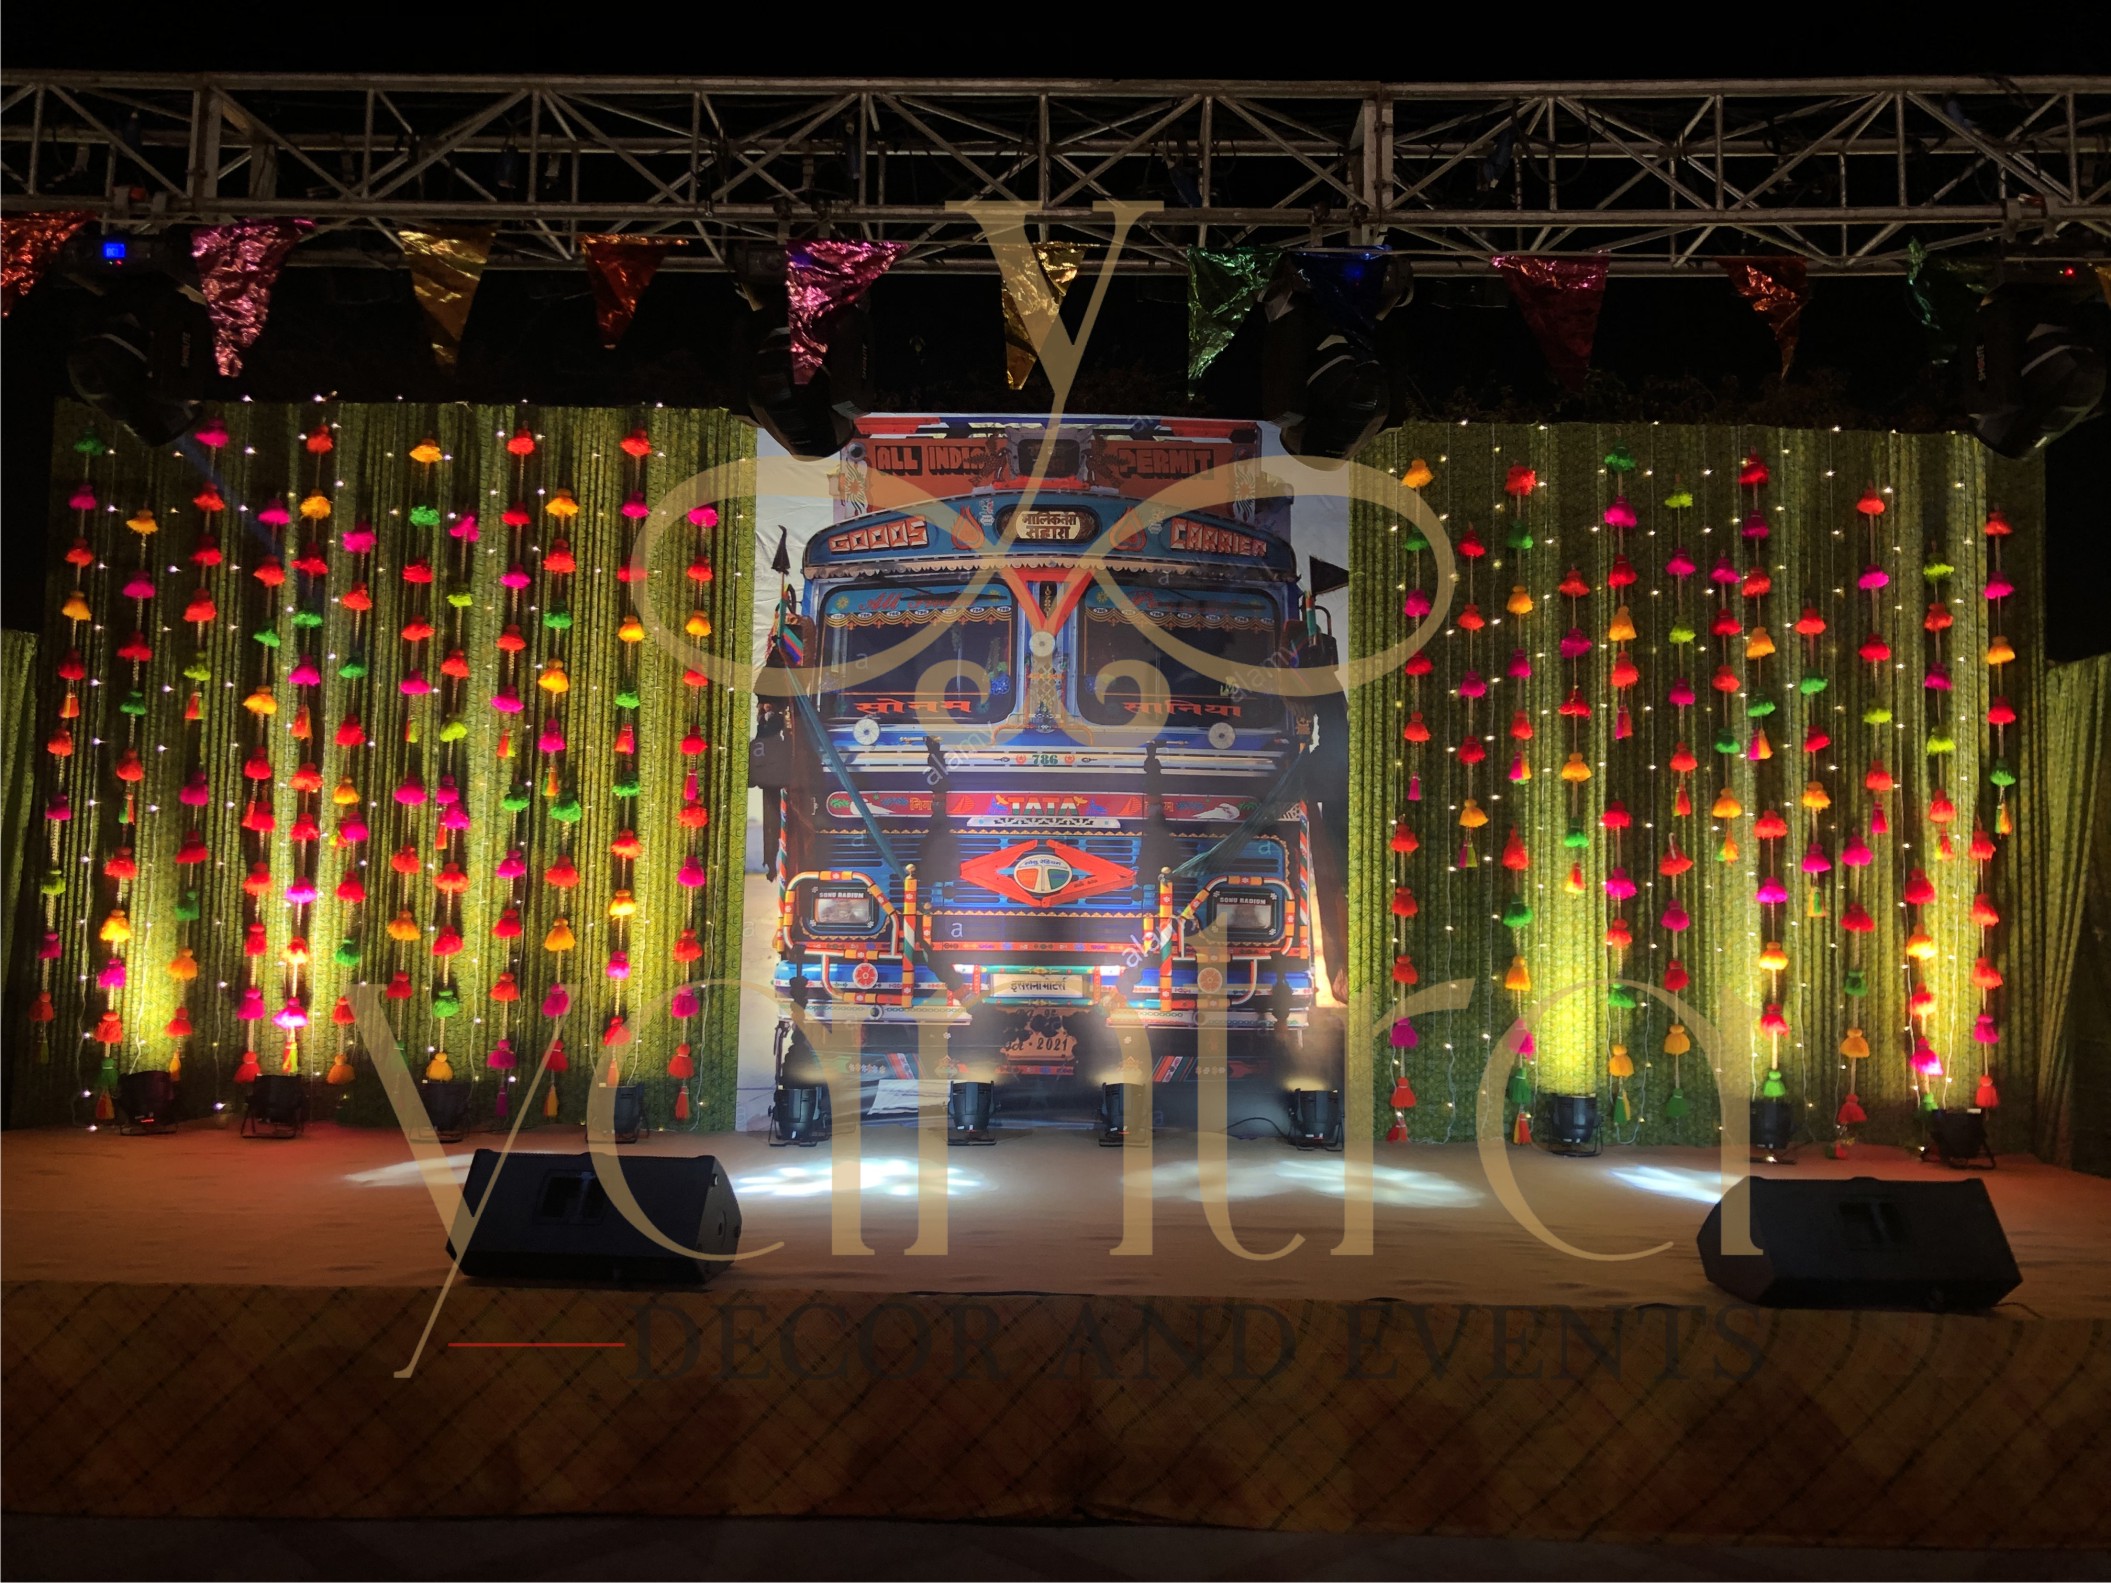 yantra-decor-events-theme-party-image-formal-party-stage